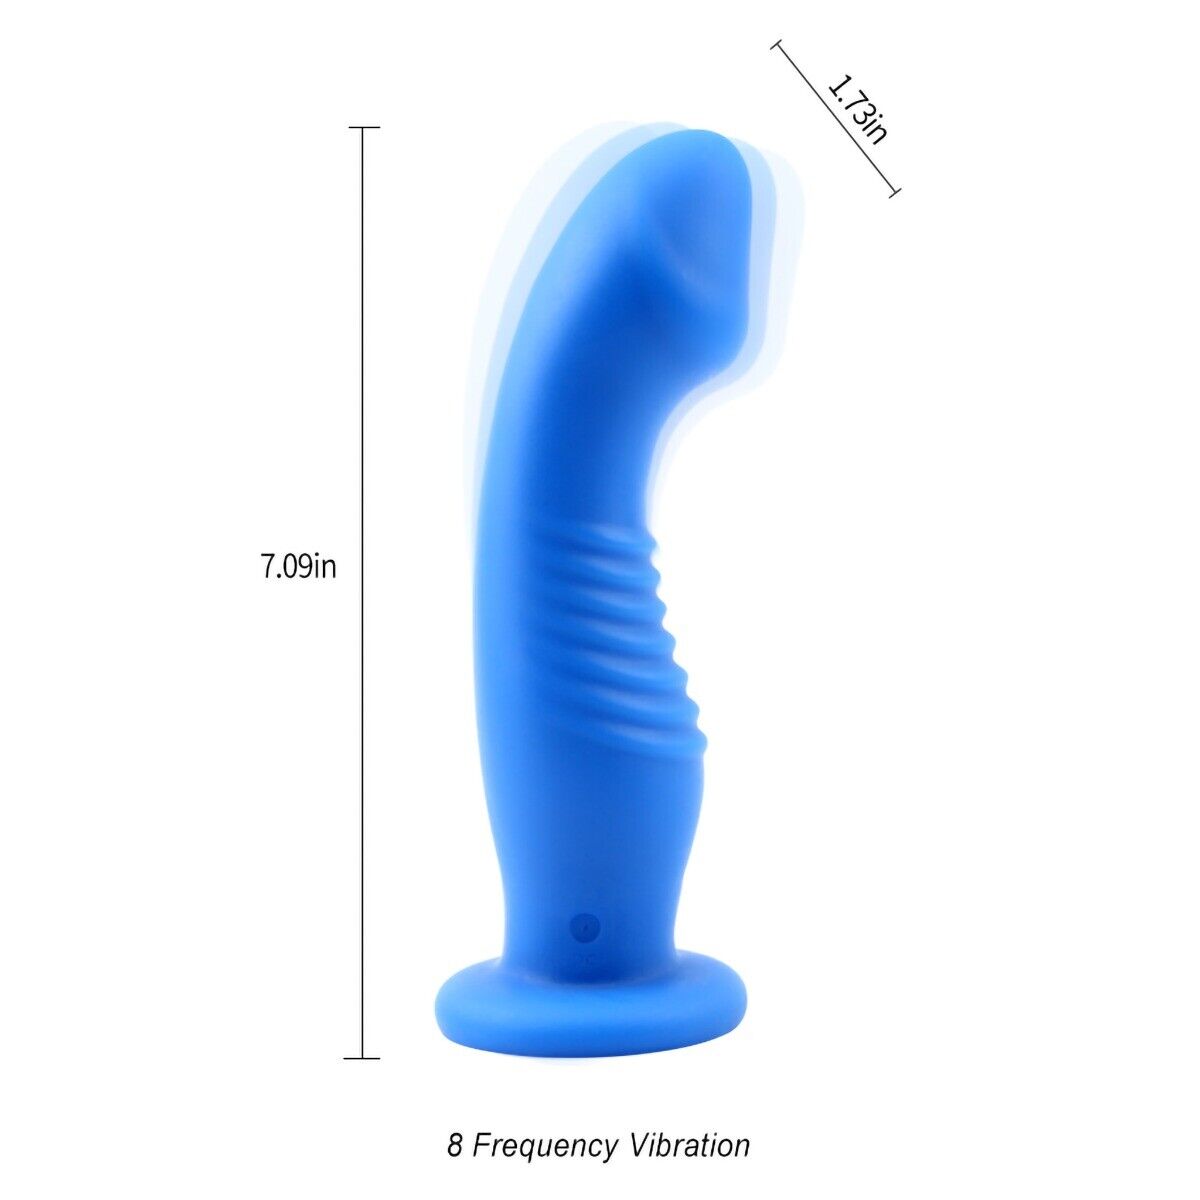 Liquid Silicone Soft Anal G-spot Vibrating Dildo Dong Vibrator Suction Cup